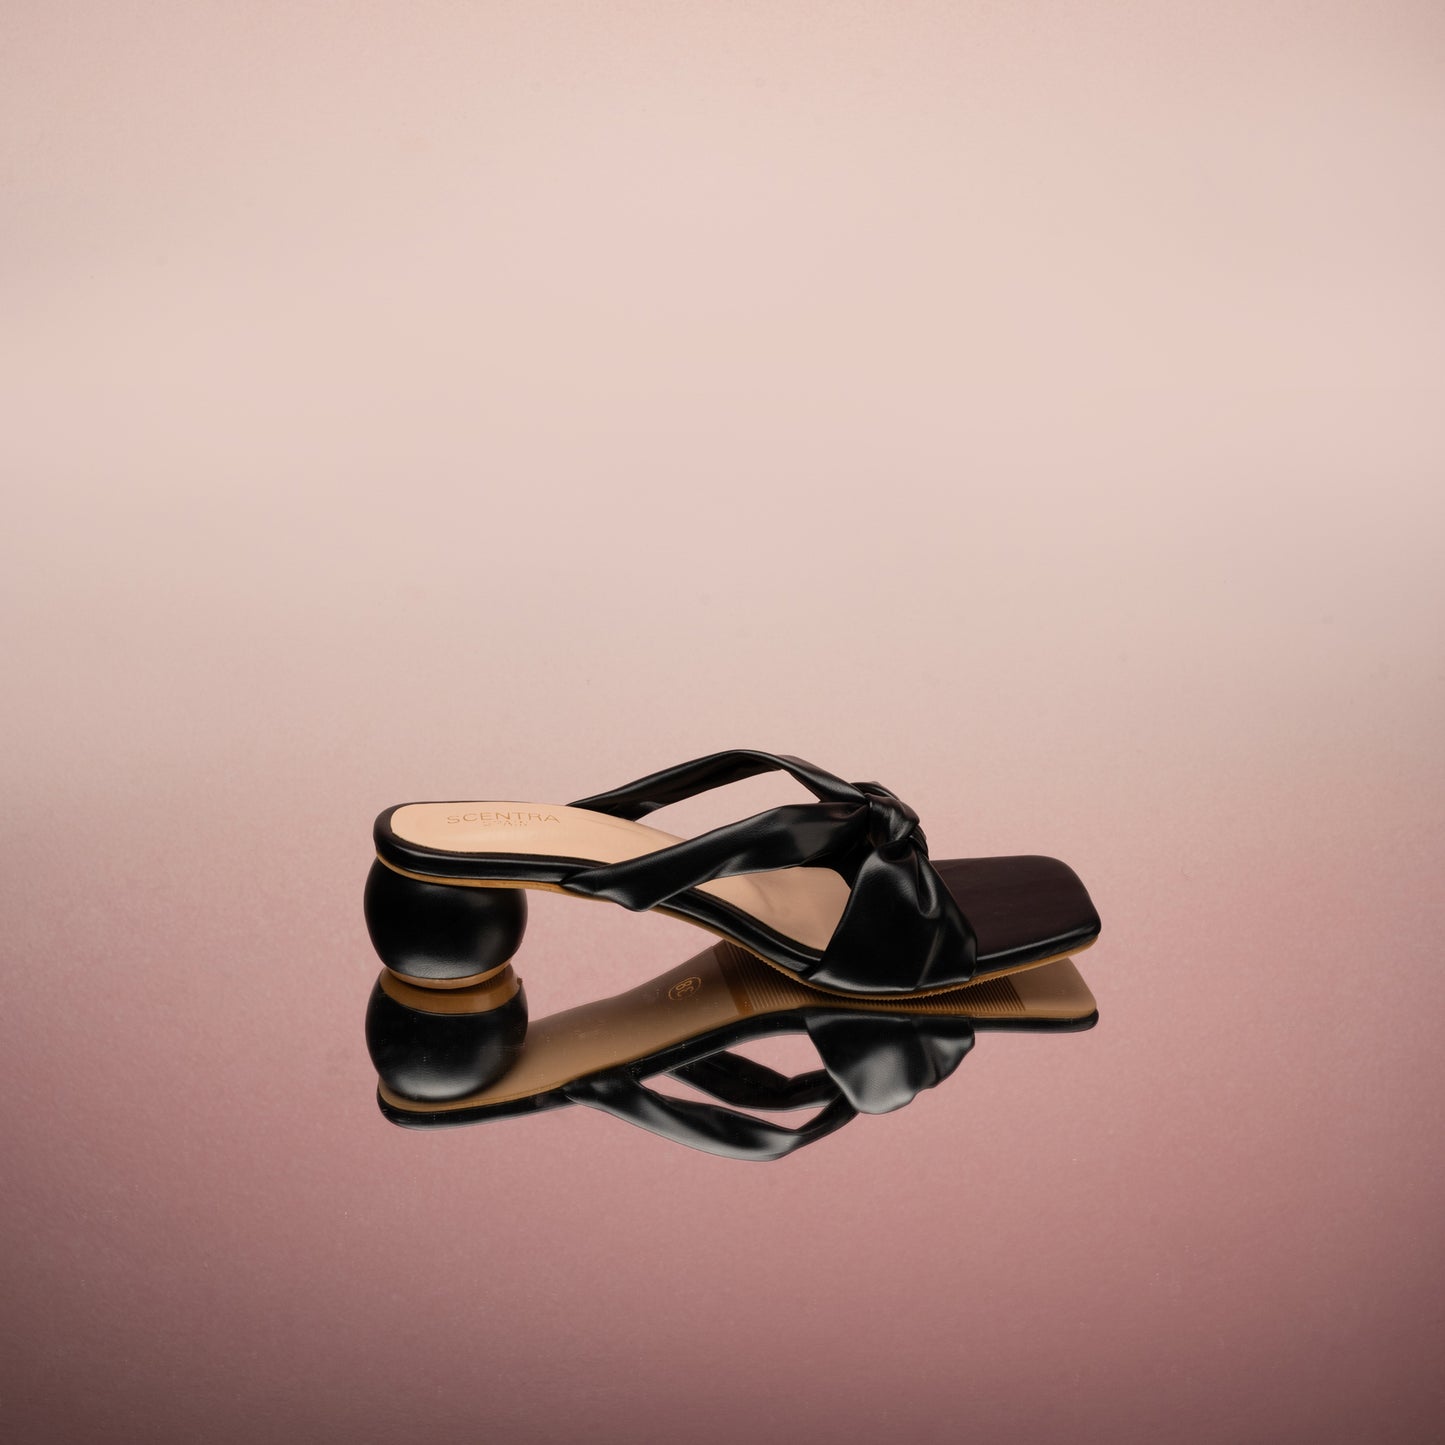 Bruce Solid Sandal With Bow